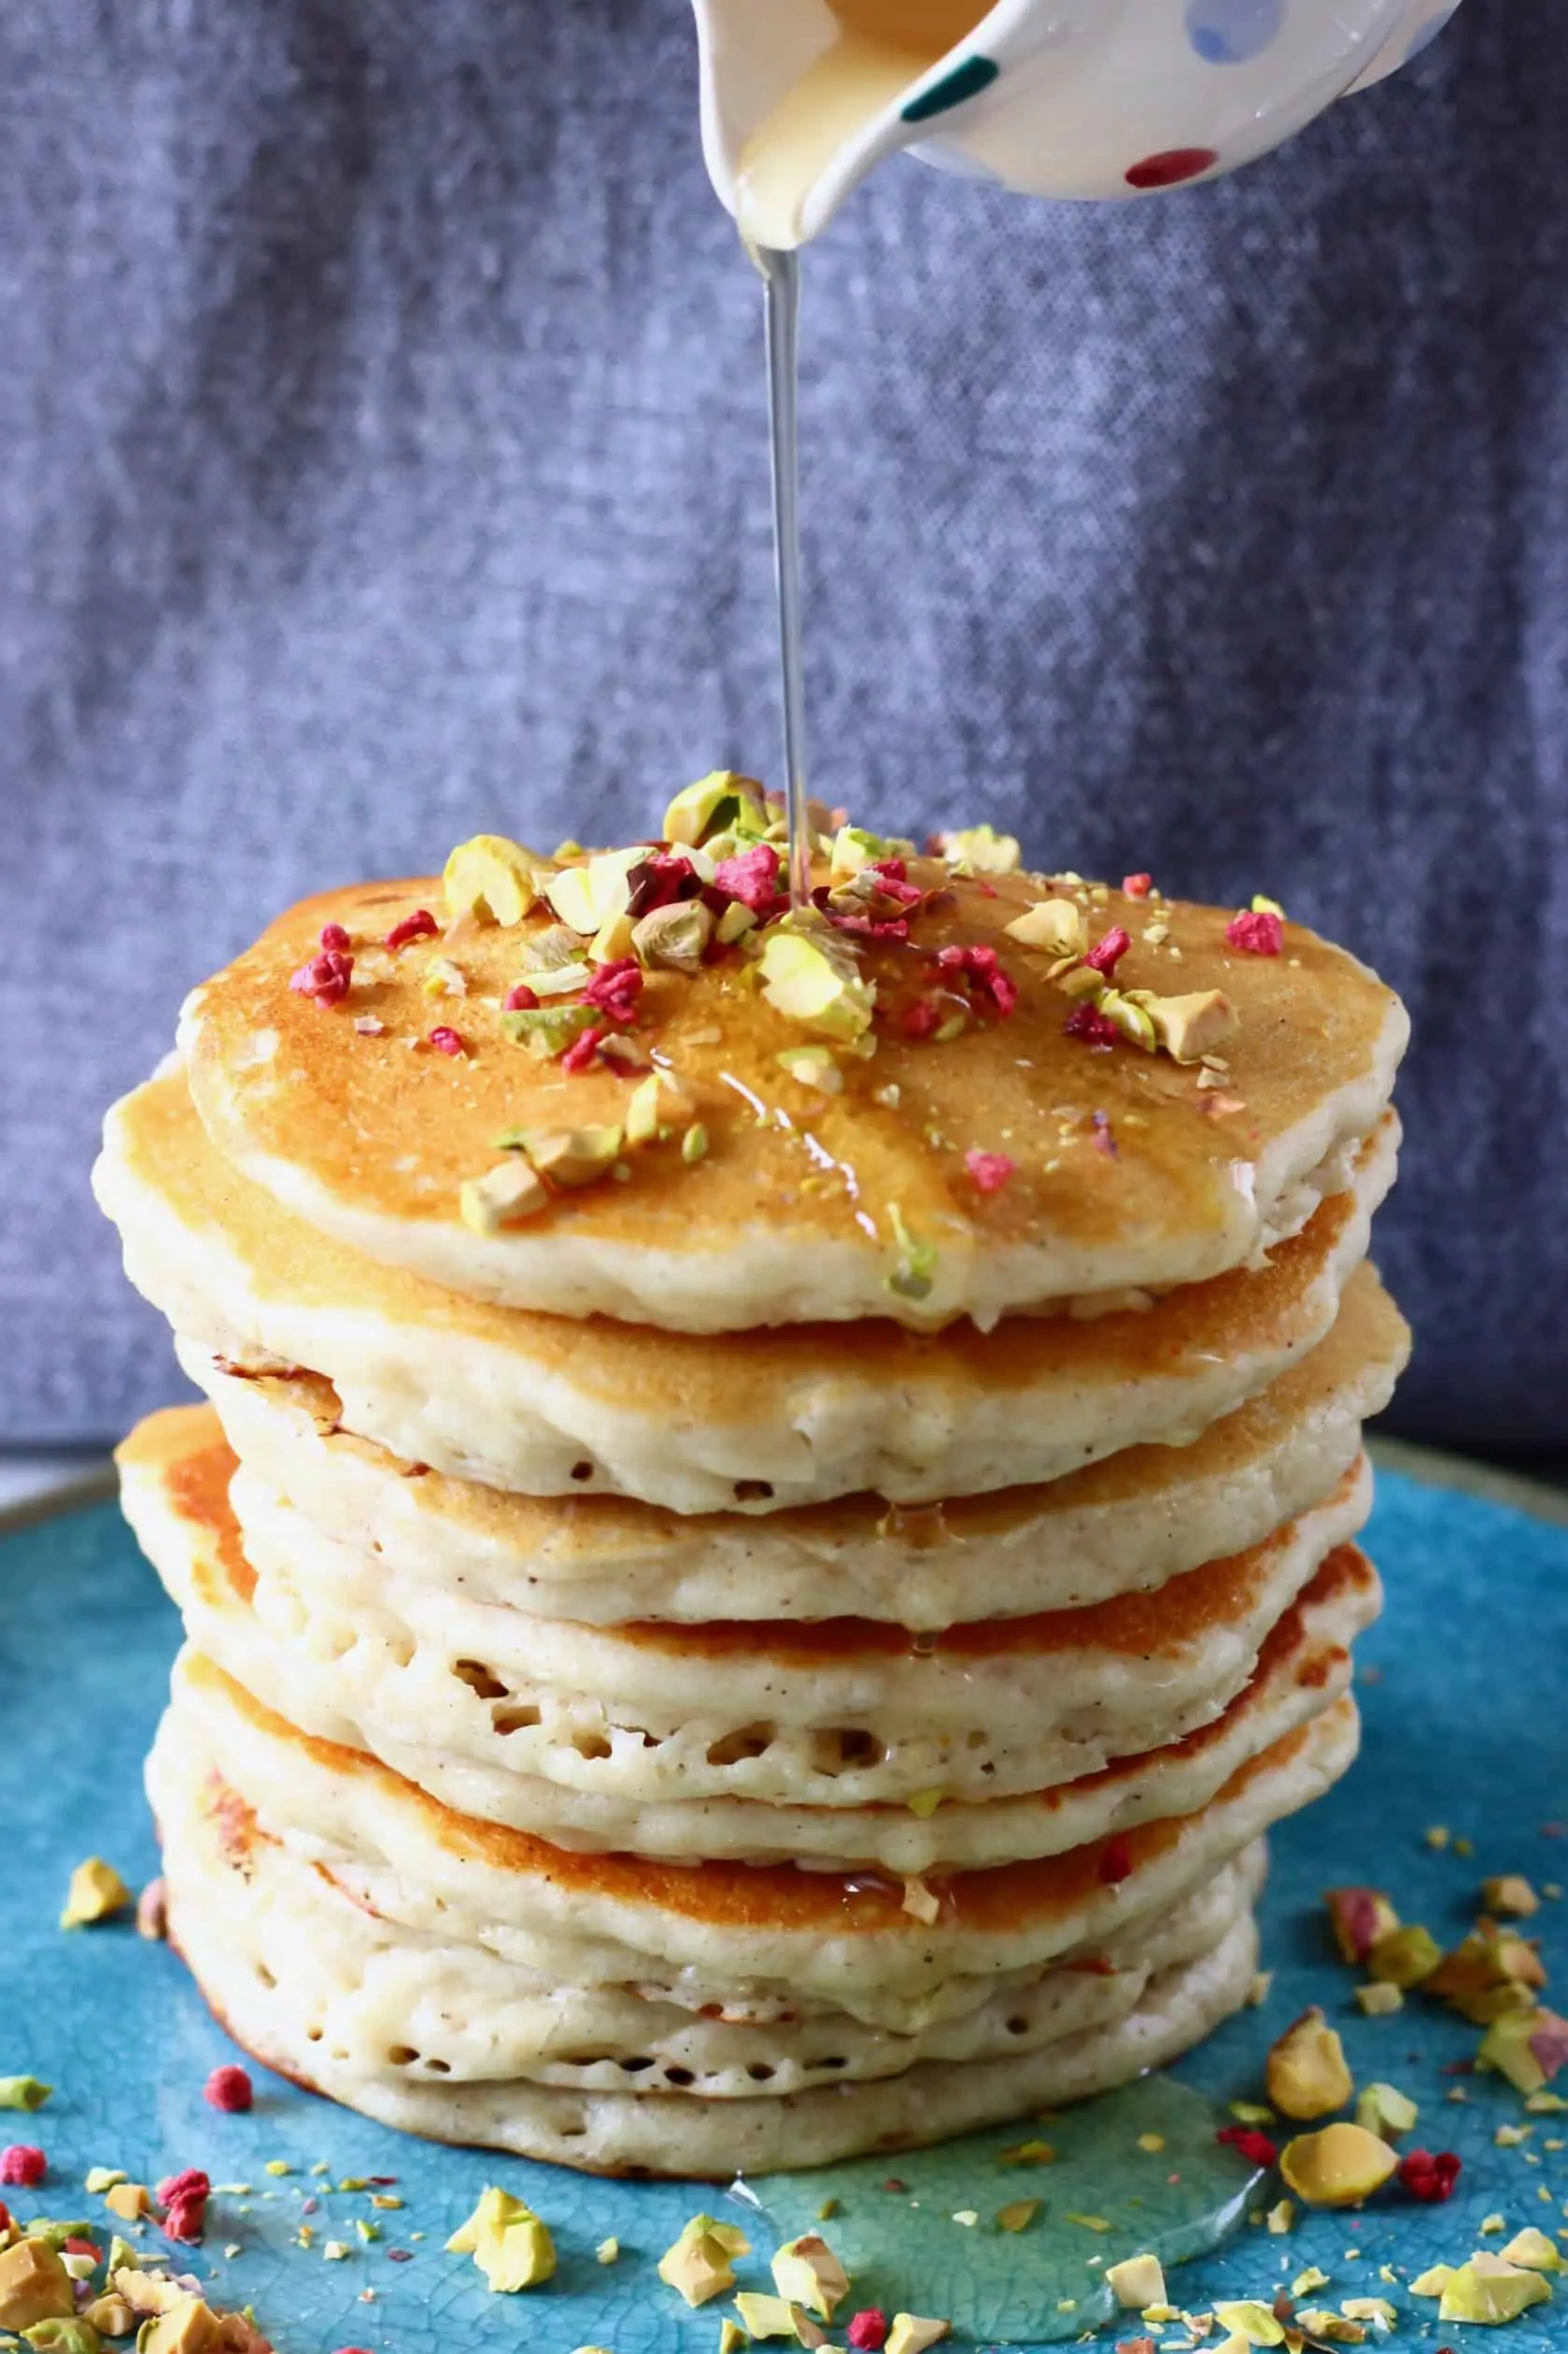 A stack of gluten-free vegan oatmeal pancakes on a plate with syrup being poured over the top from a small jug